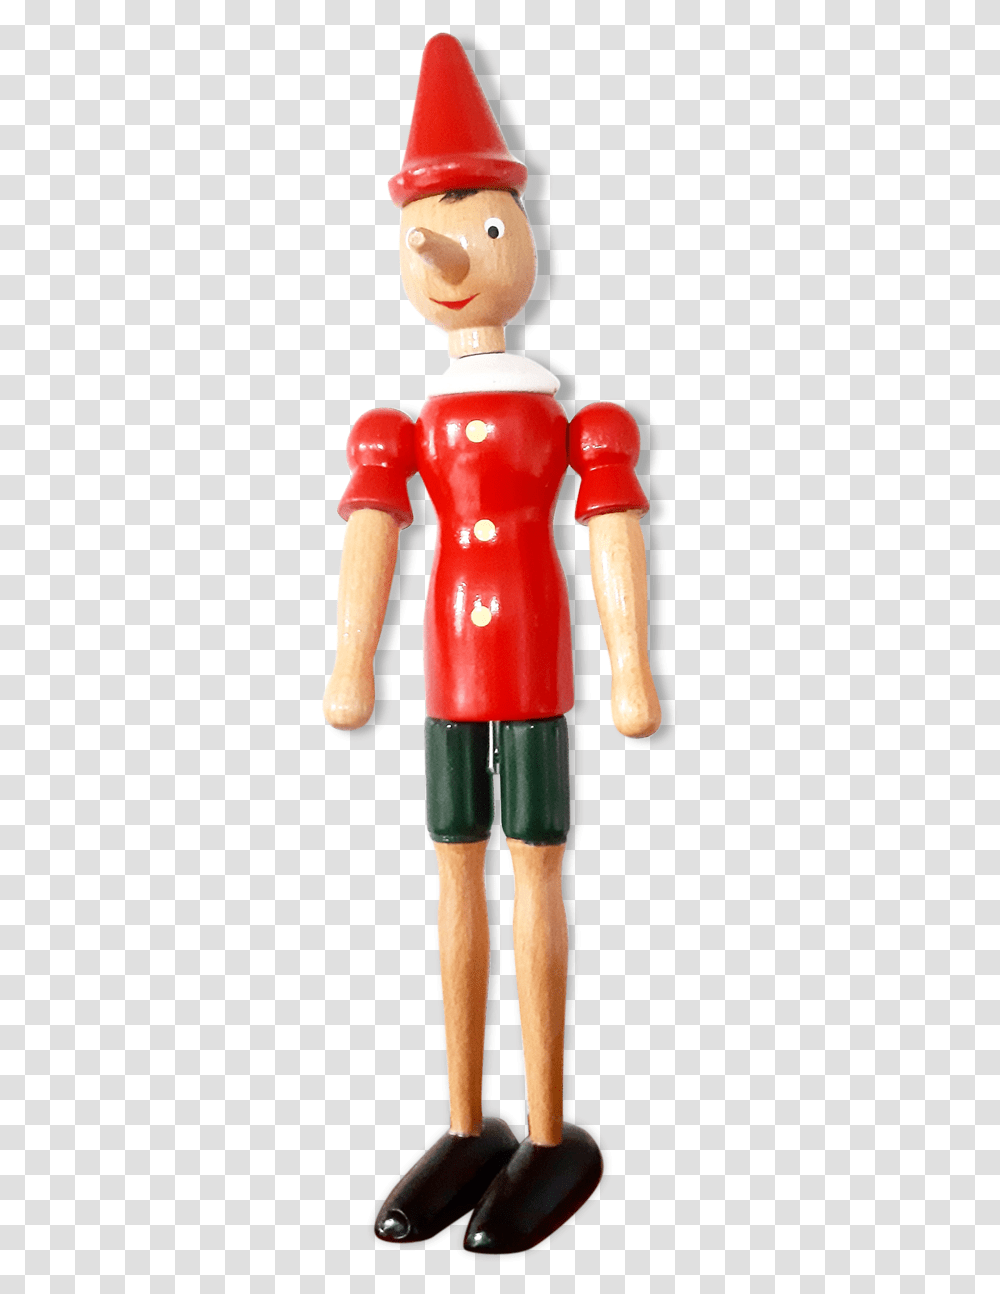 Pinocchio Articulated In Wooden From The 70Src Https Figurine, Toy, Nutcracker, PEZ Dispenser Transparent Png